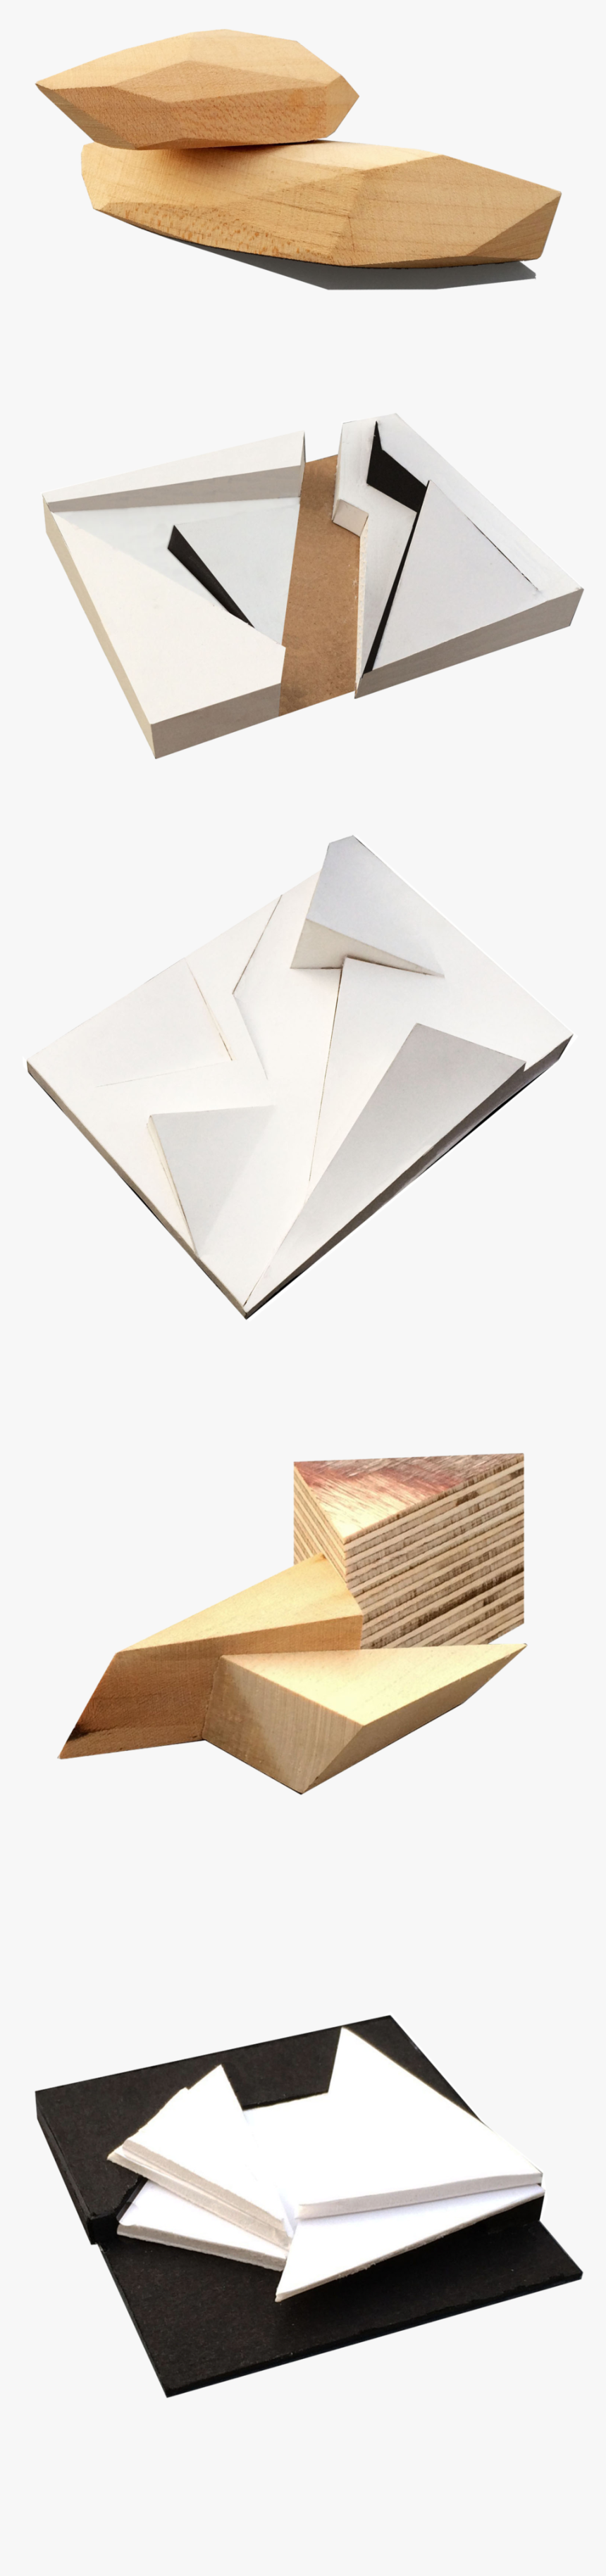 Study Models Exploring Different Massing Combinations - Plywood, HD Png Download, Free Download